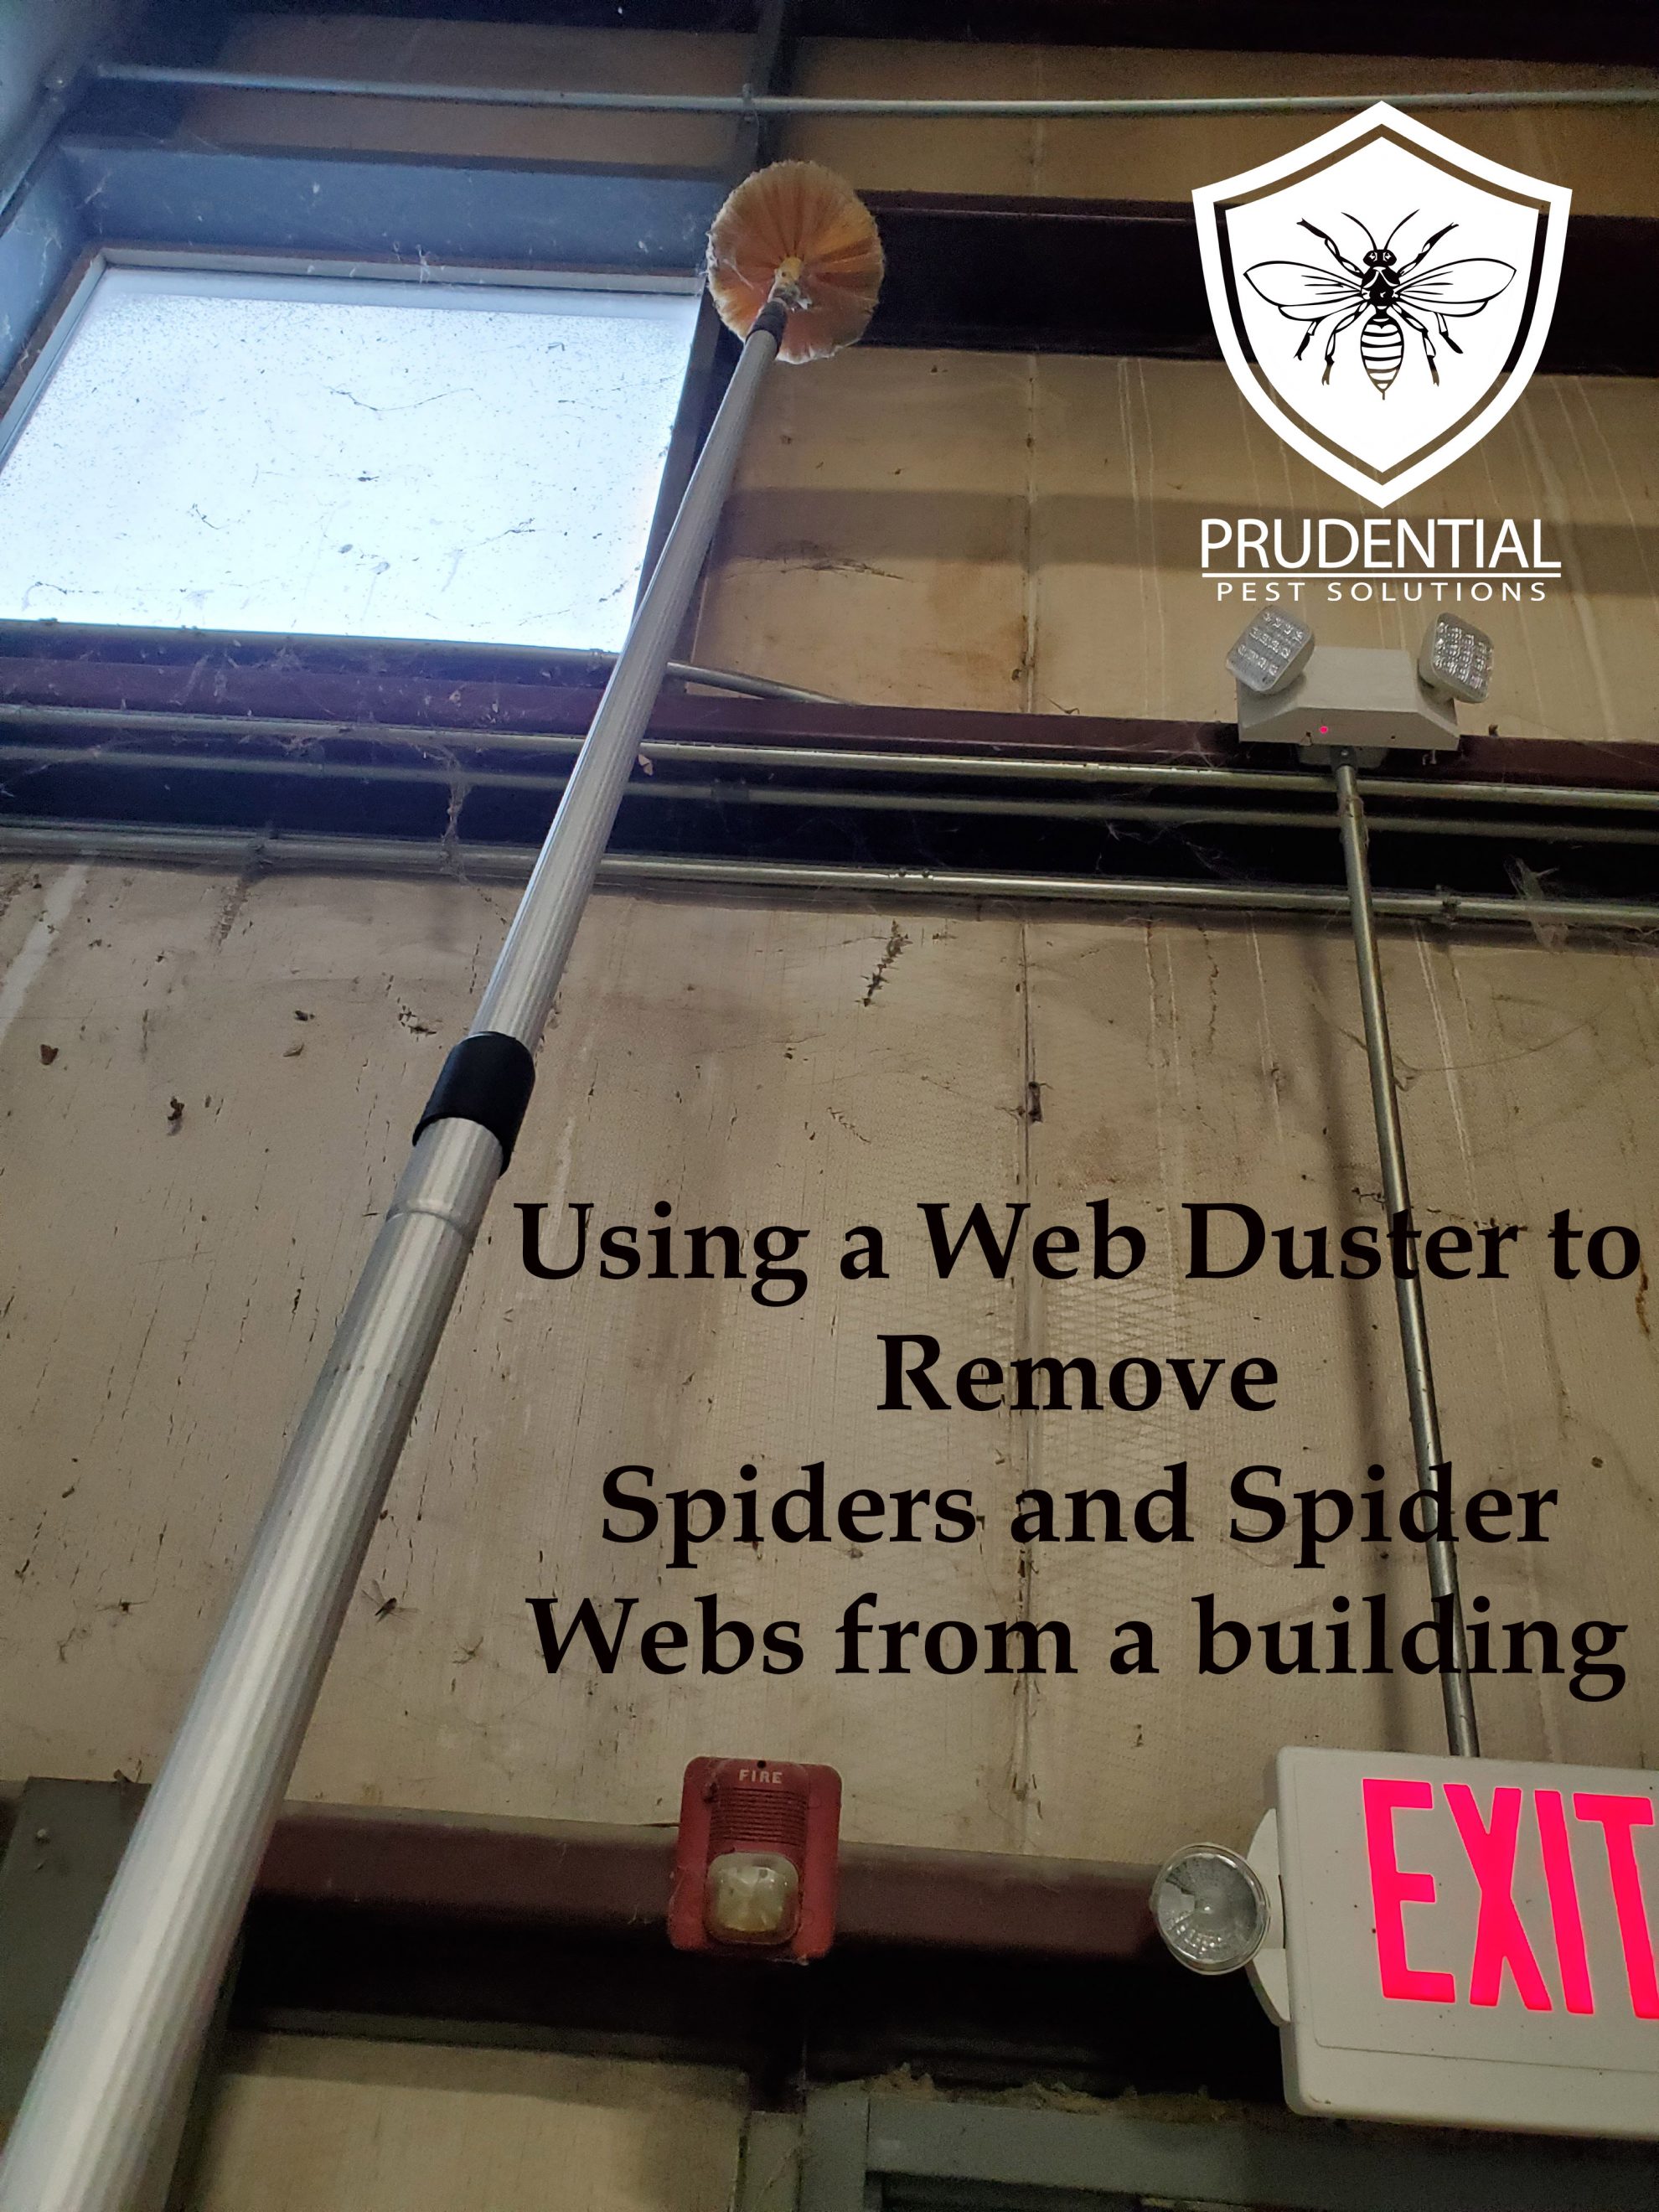 Spider Control Solutions Prudential Pest Solutions 1141